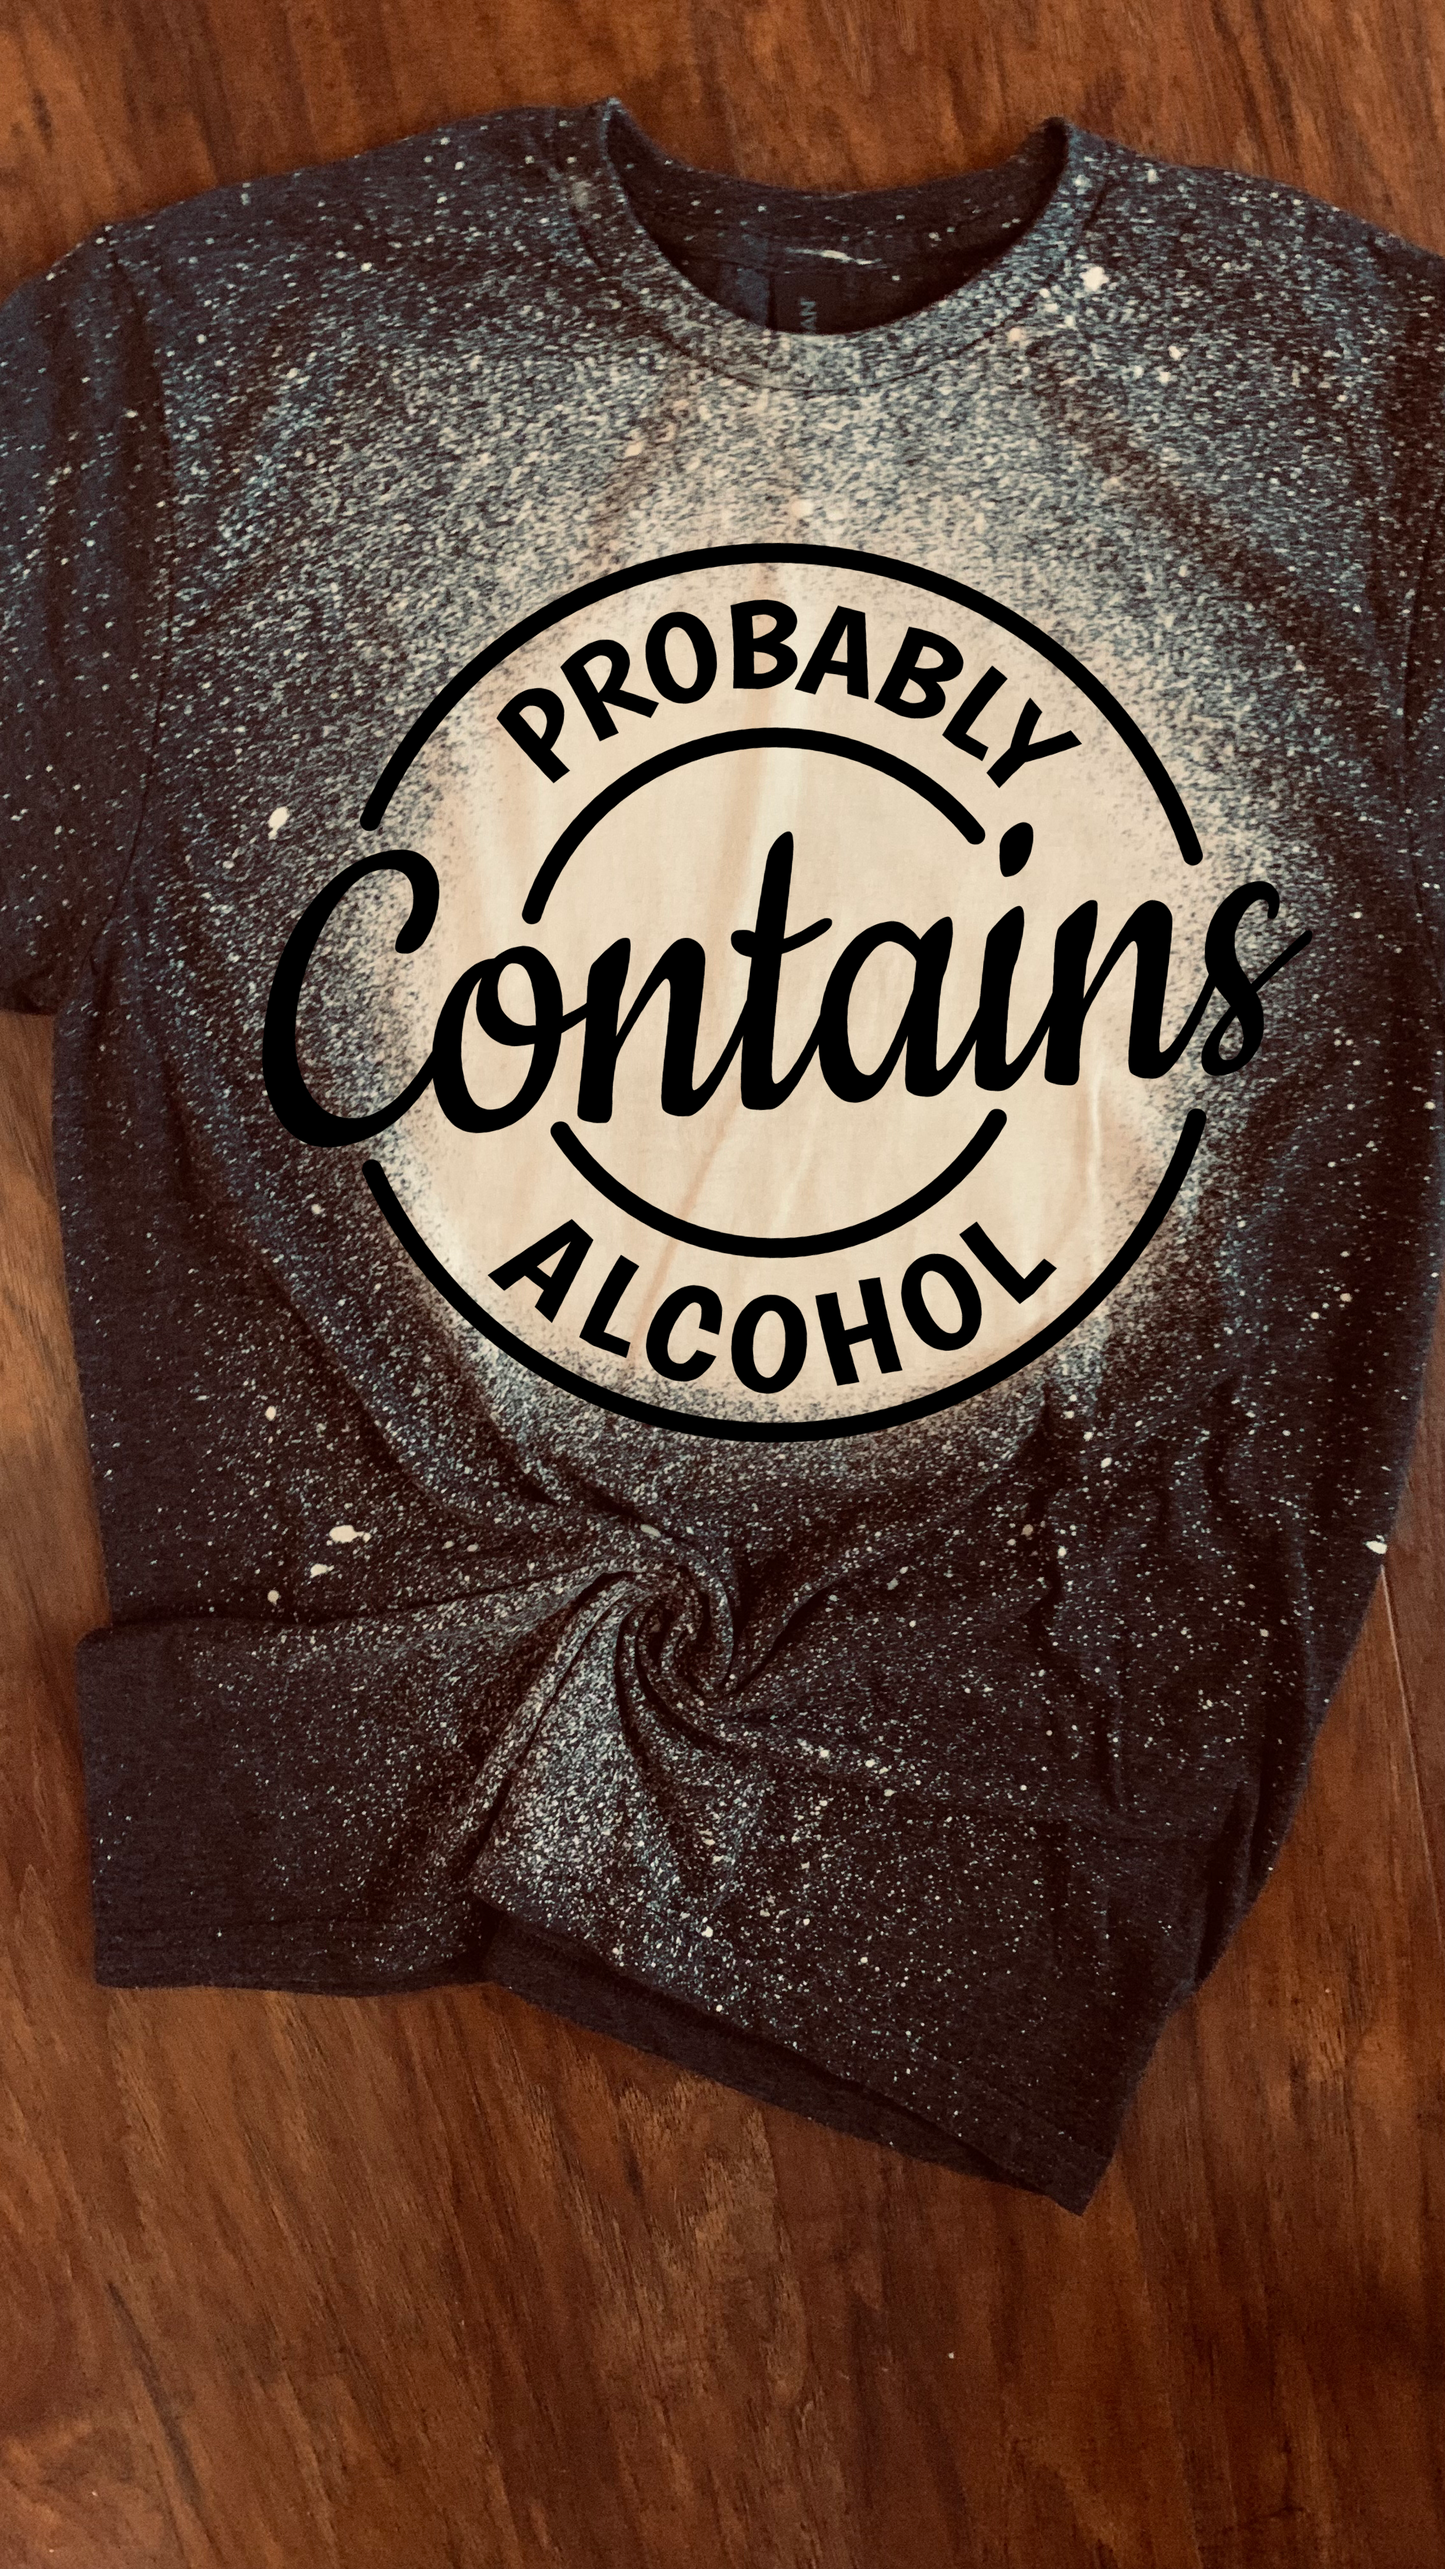 Probably contains Alcohol